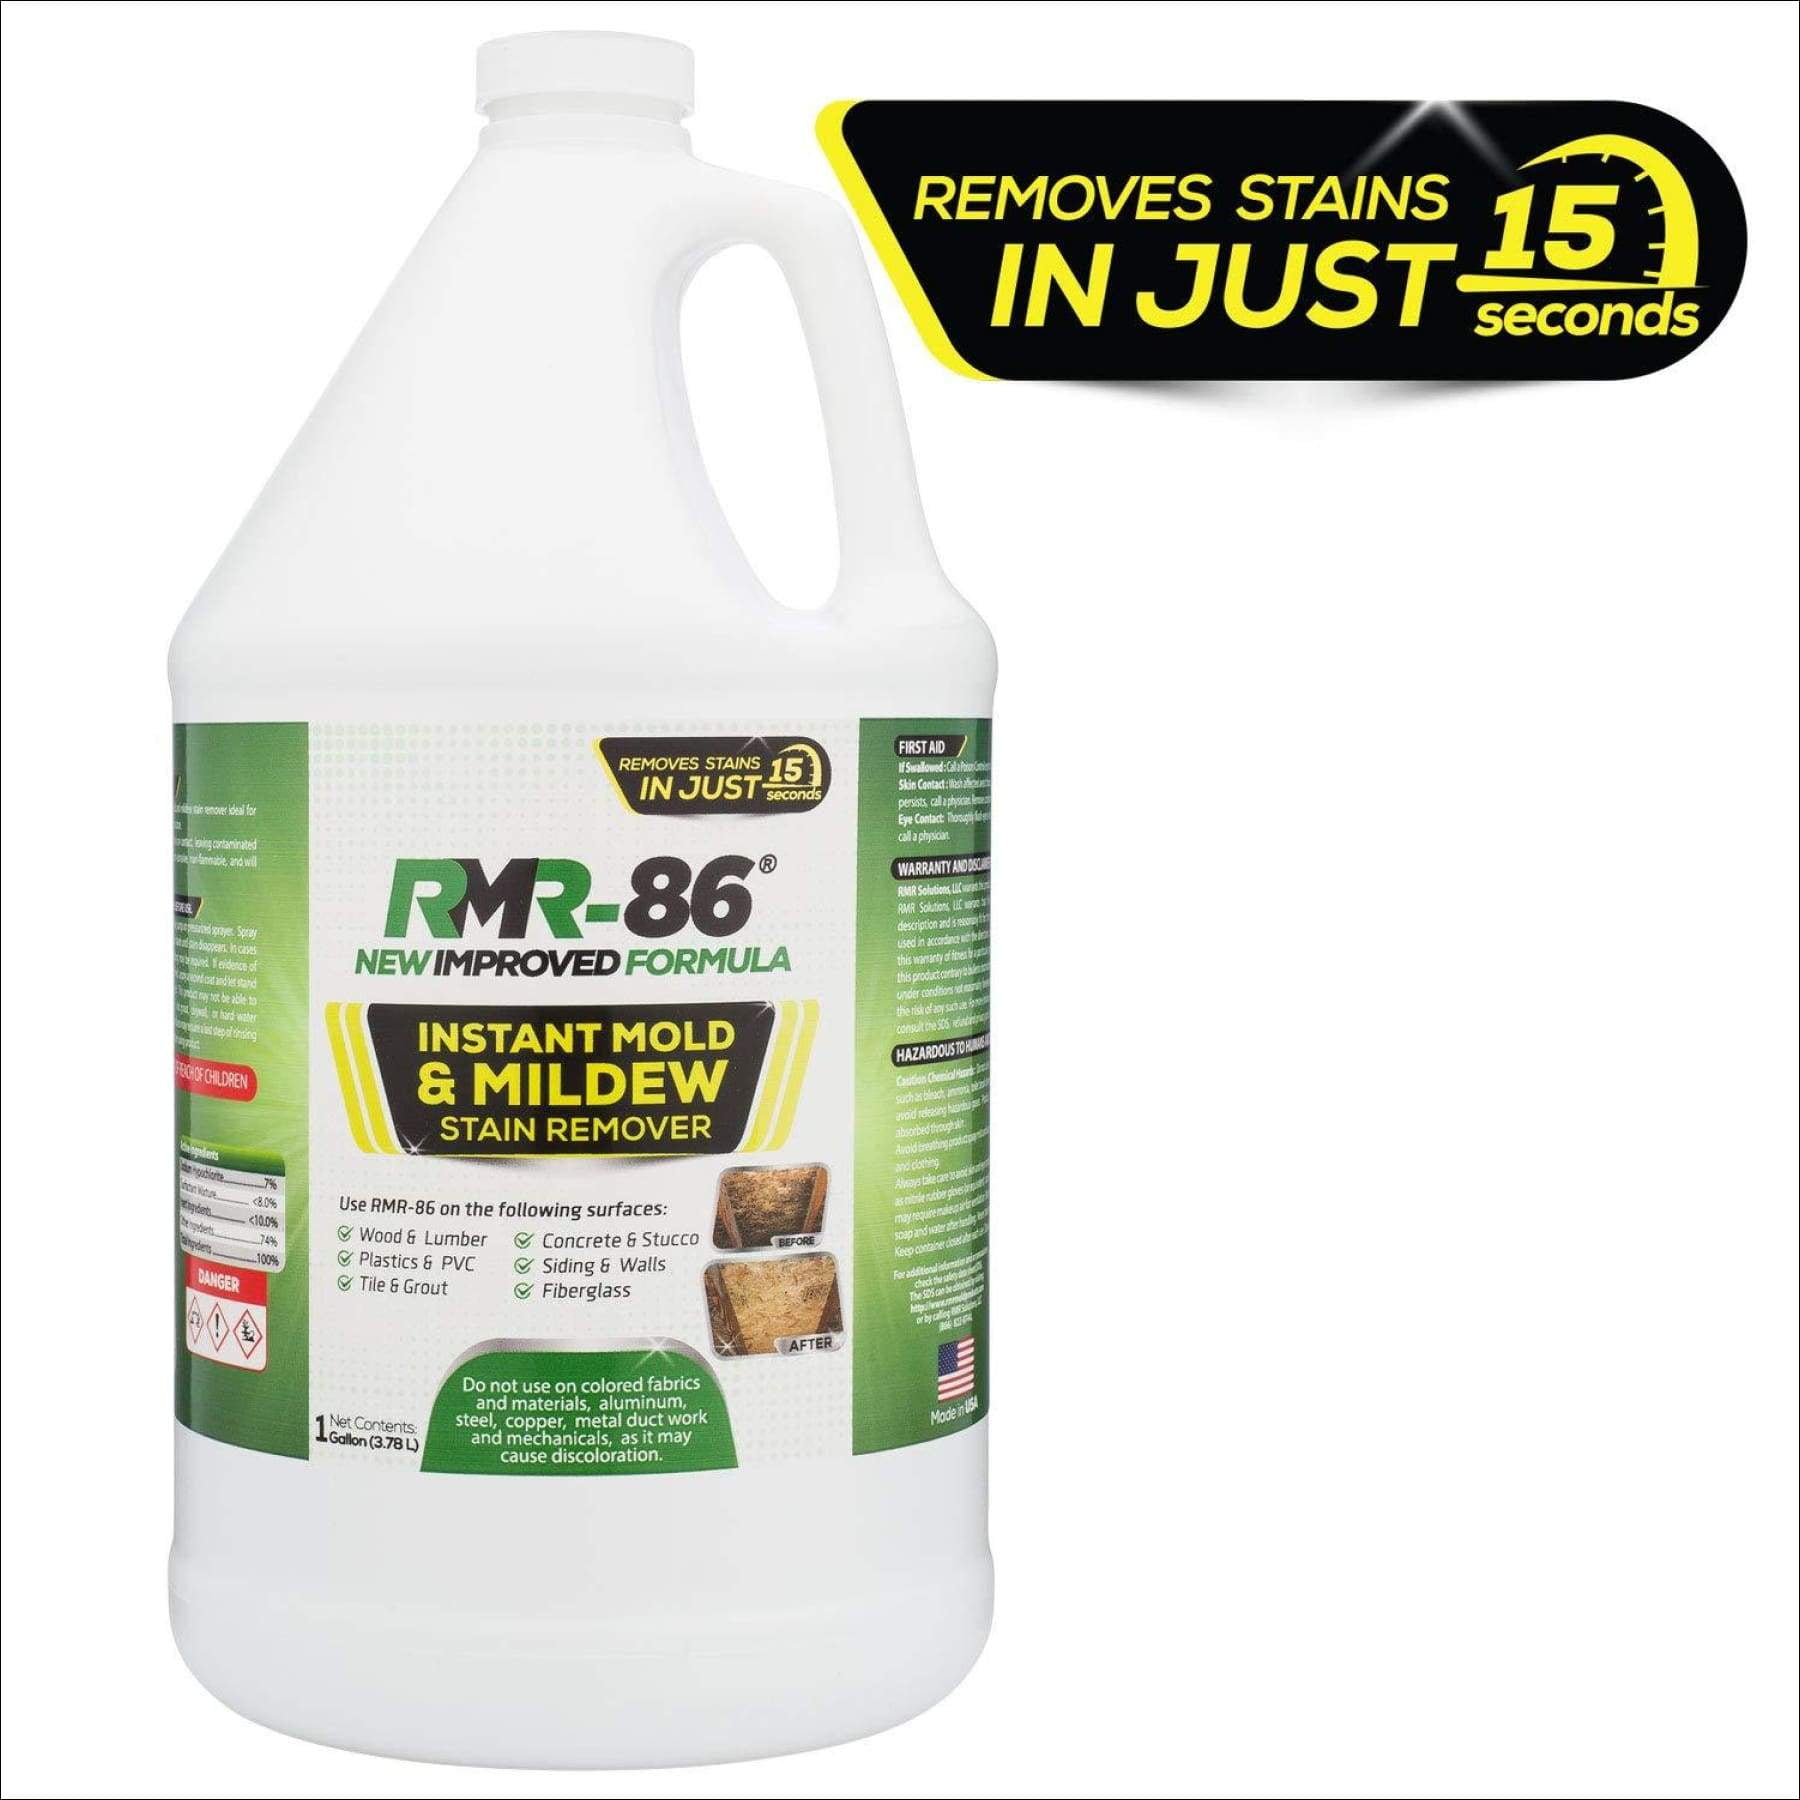 Marblelife Mold and Mildew Stain Remover